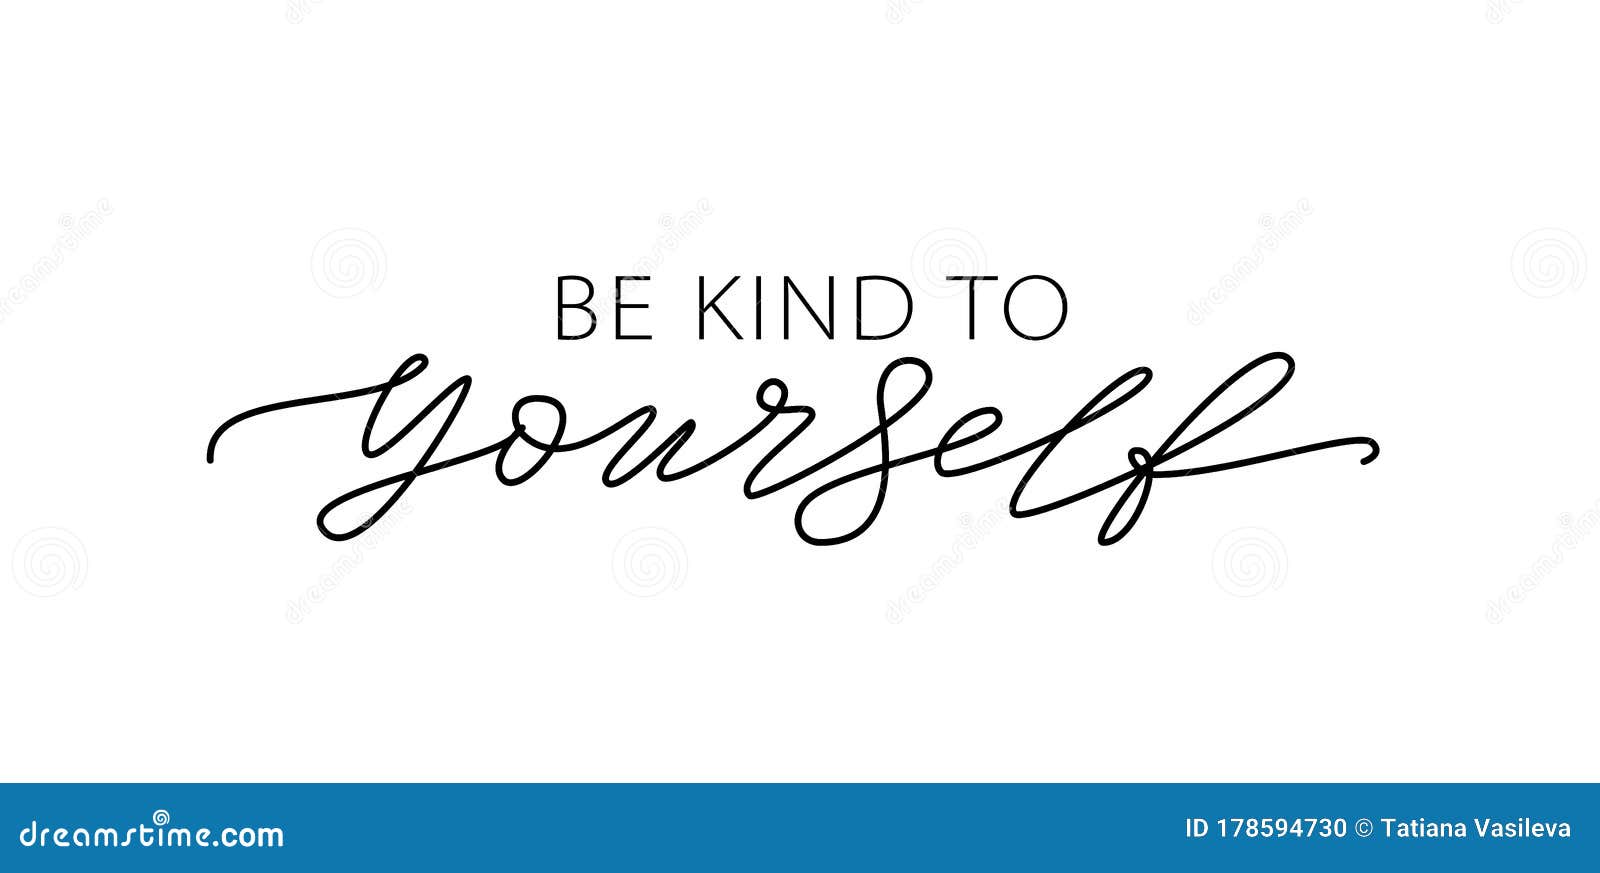 be kind to yourself. text about taking care of yourself.